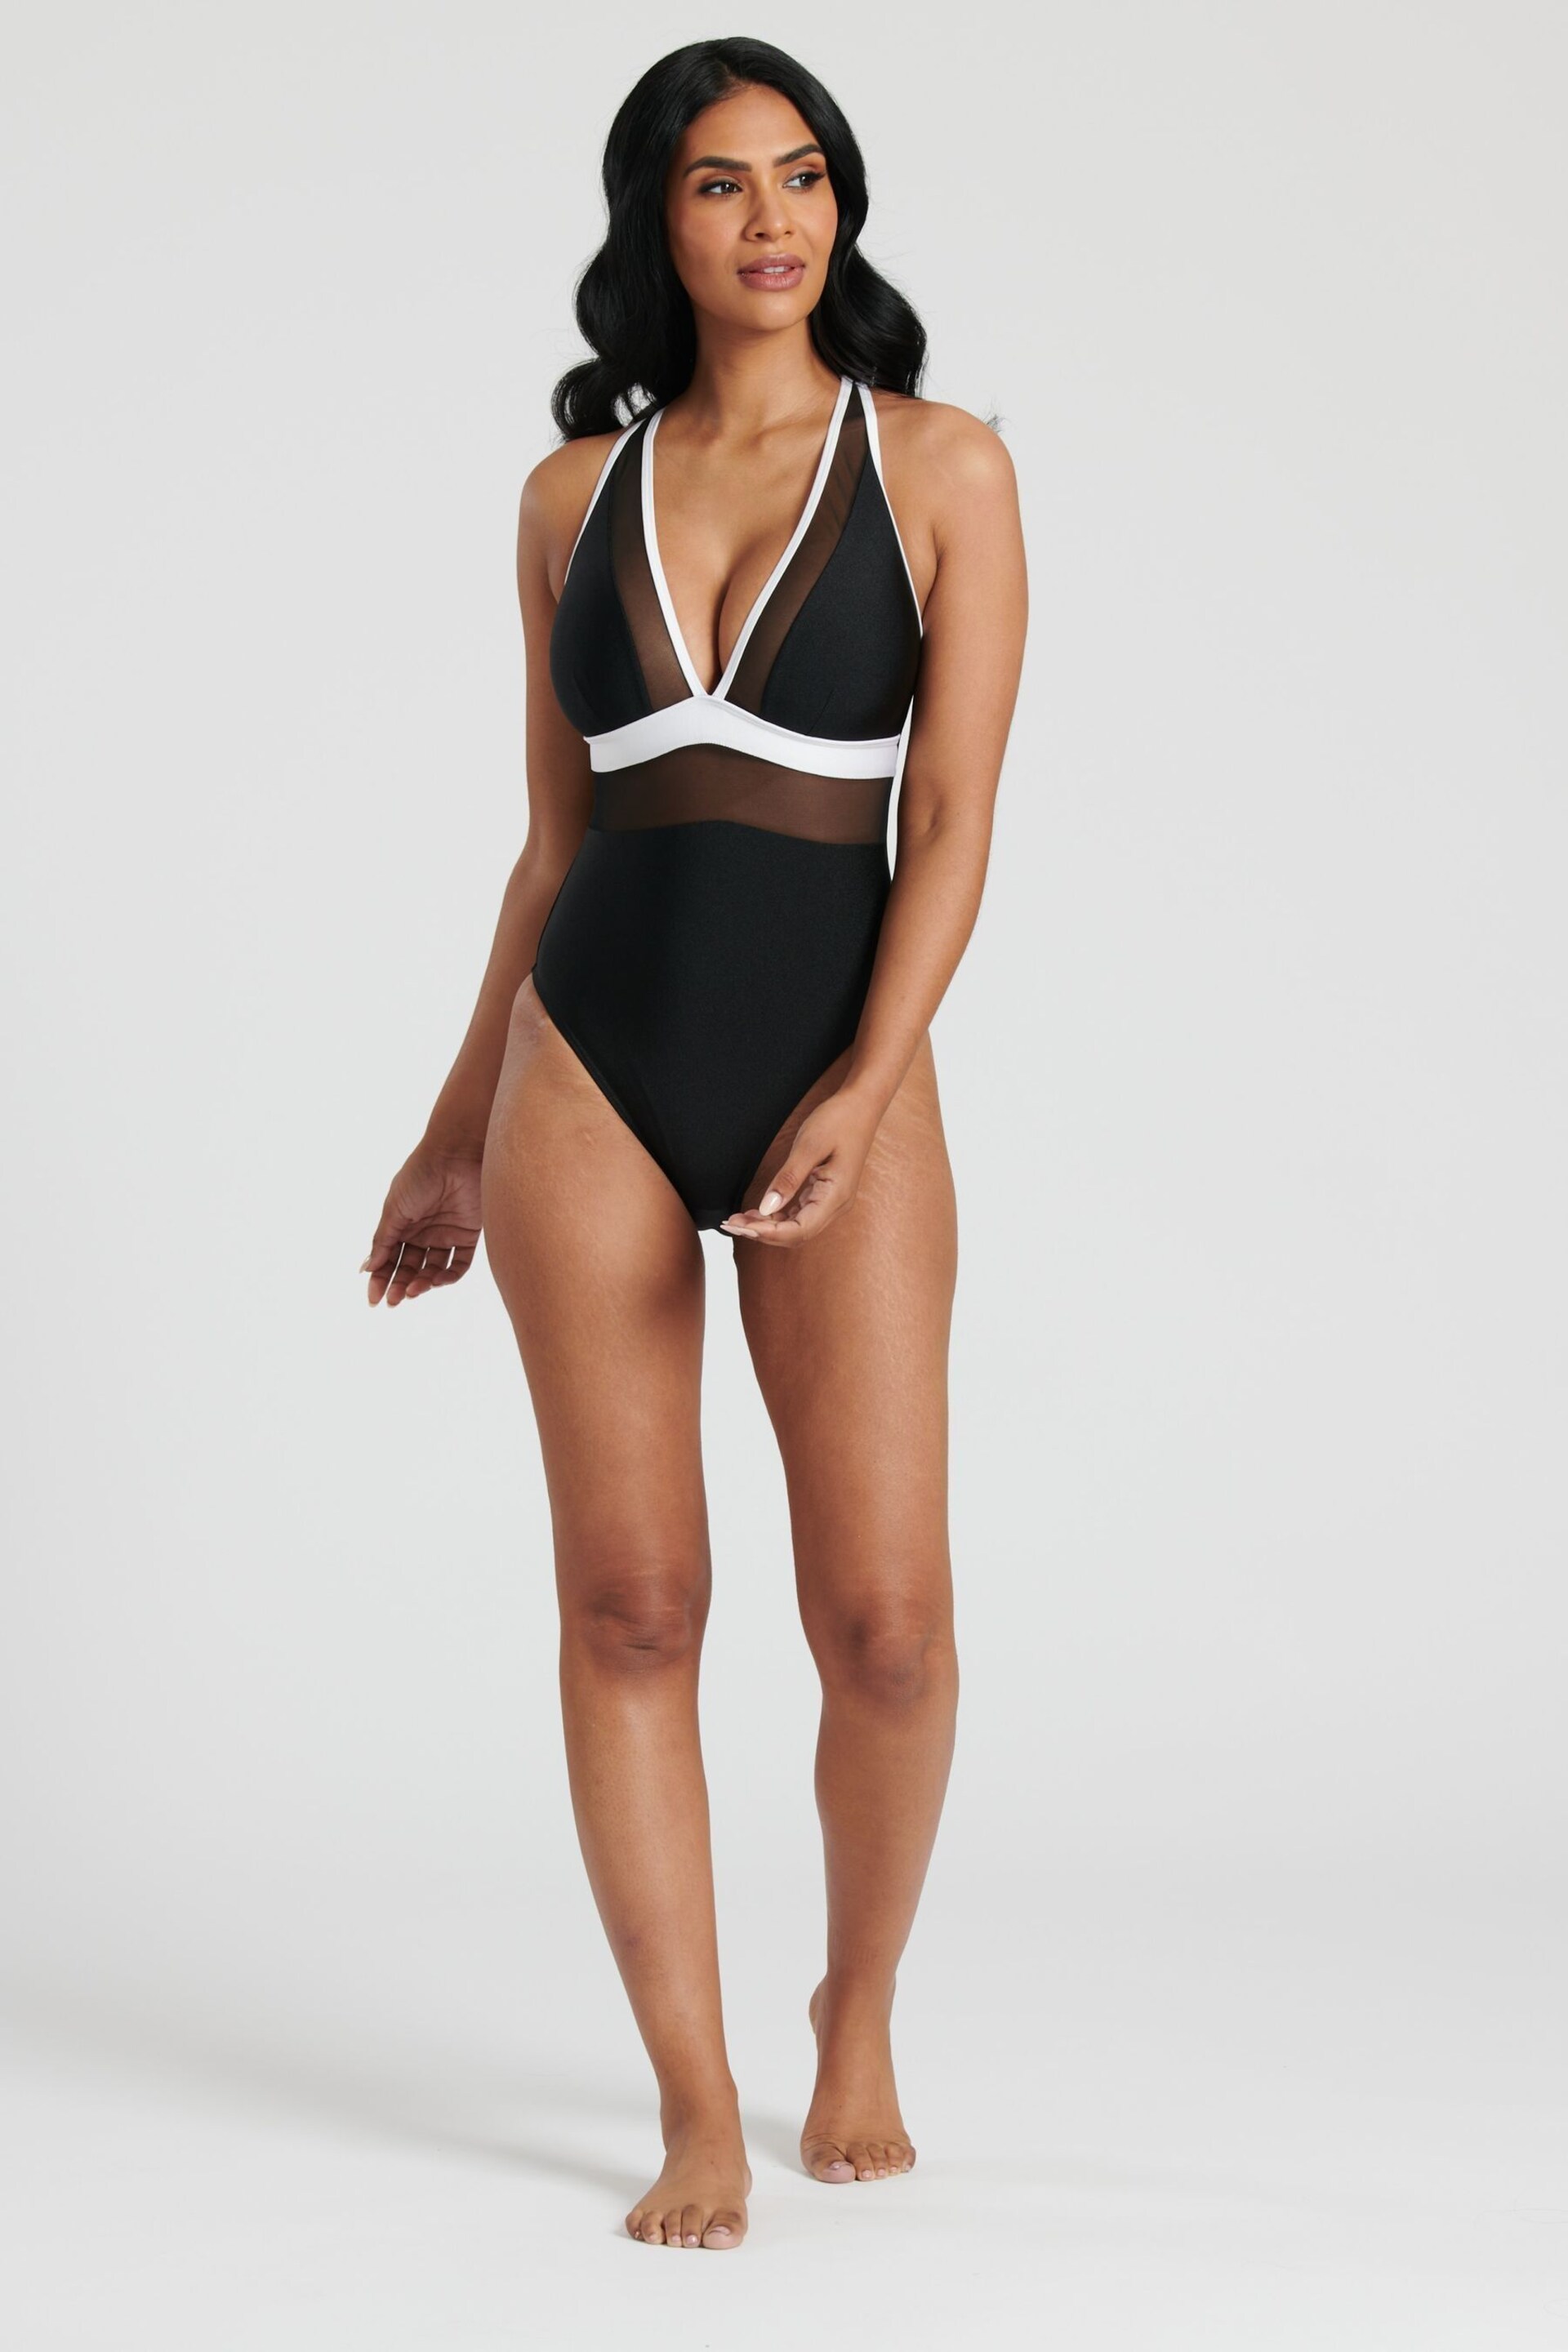 South Beach Monochrome Mesh Plunge Swimsuit - Image 4 of 6